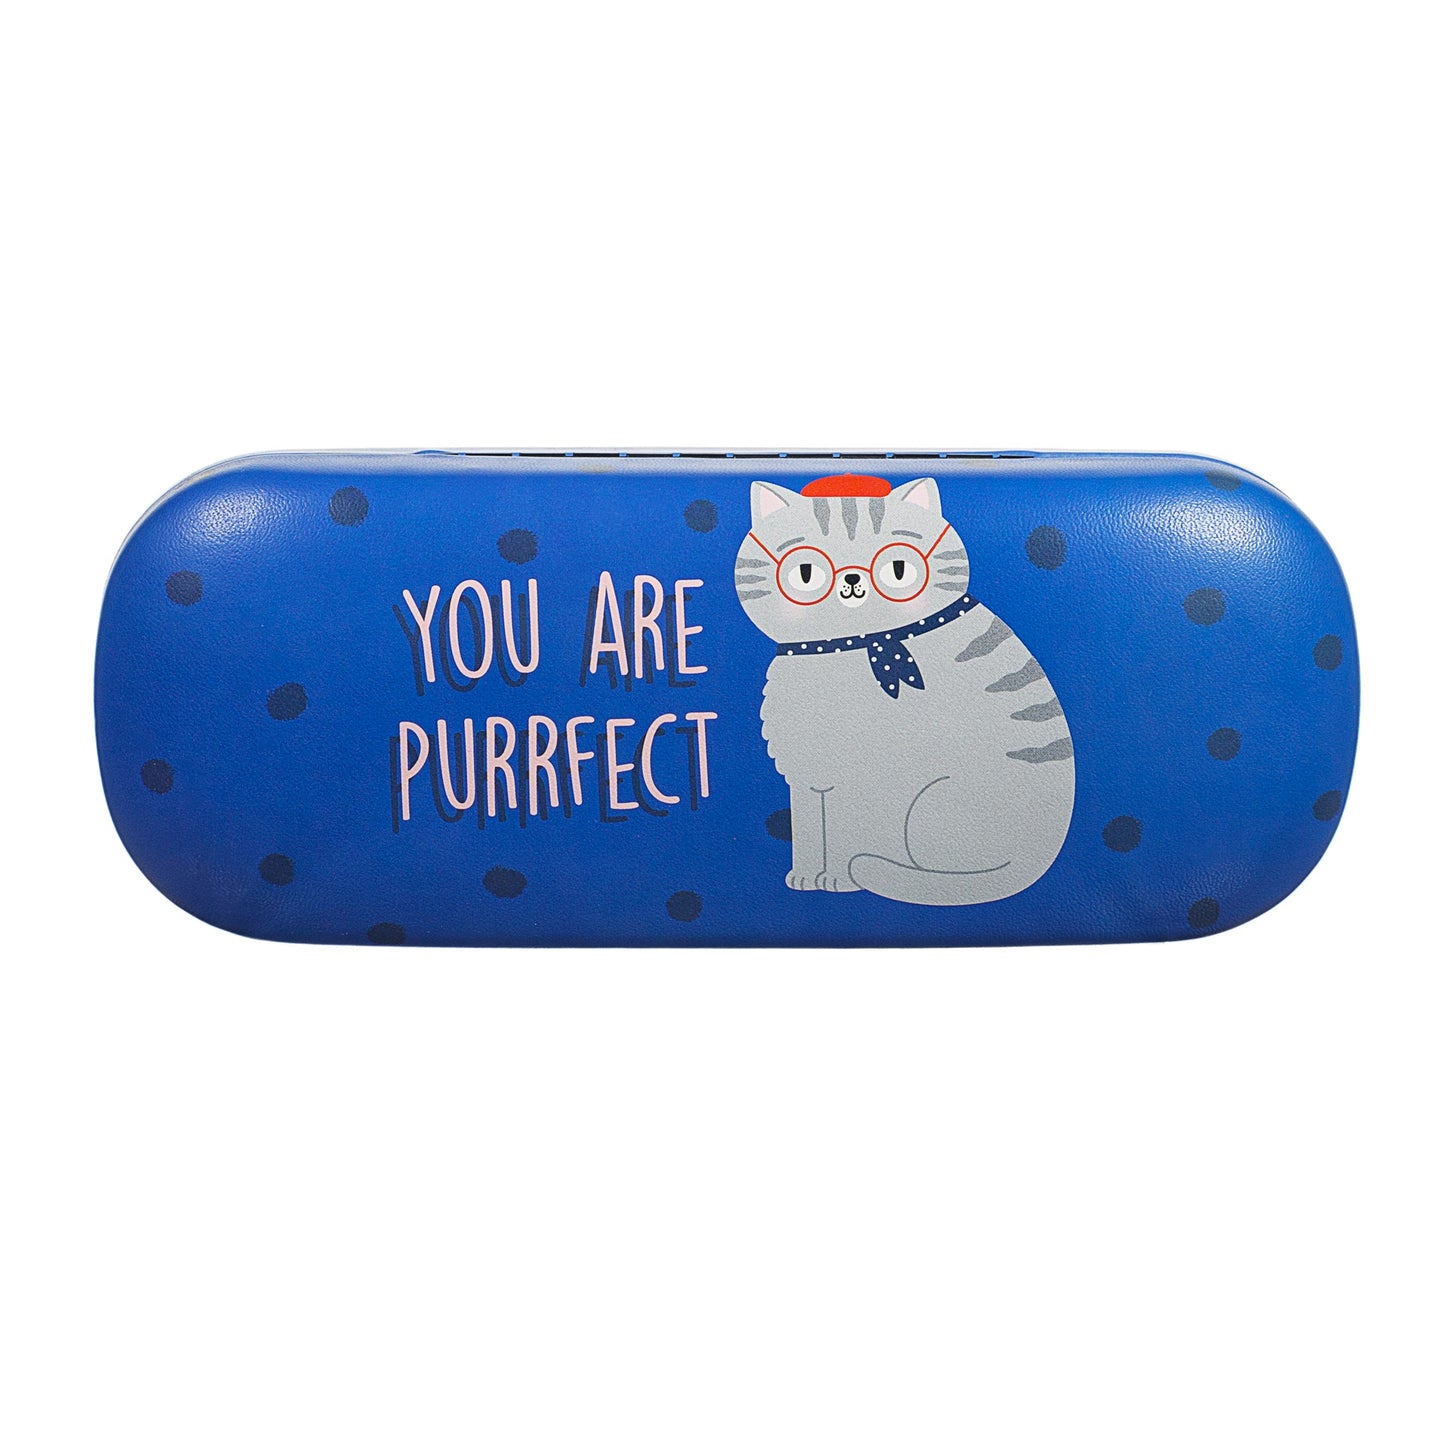 Purrfection awaits with our Vibrant Blue and Grey Cat Glasses Case! Show off your love for our feline friends with this adorable case, complete with a cat character and the quote "you are purrfect". The soft interior and included cleaning cloth will keep your glasses protected, while the blue and grey colourway adds a touch of vibrancy to your accessories collection.